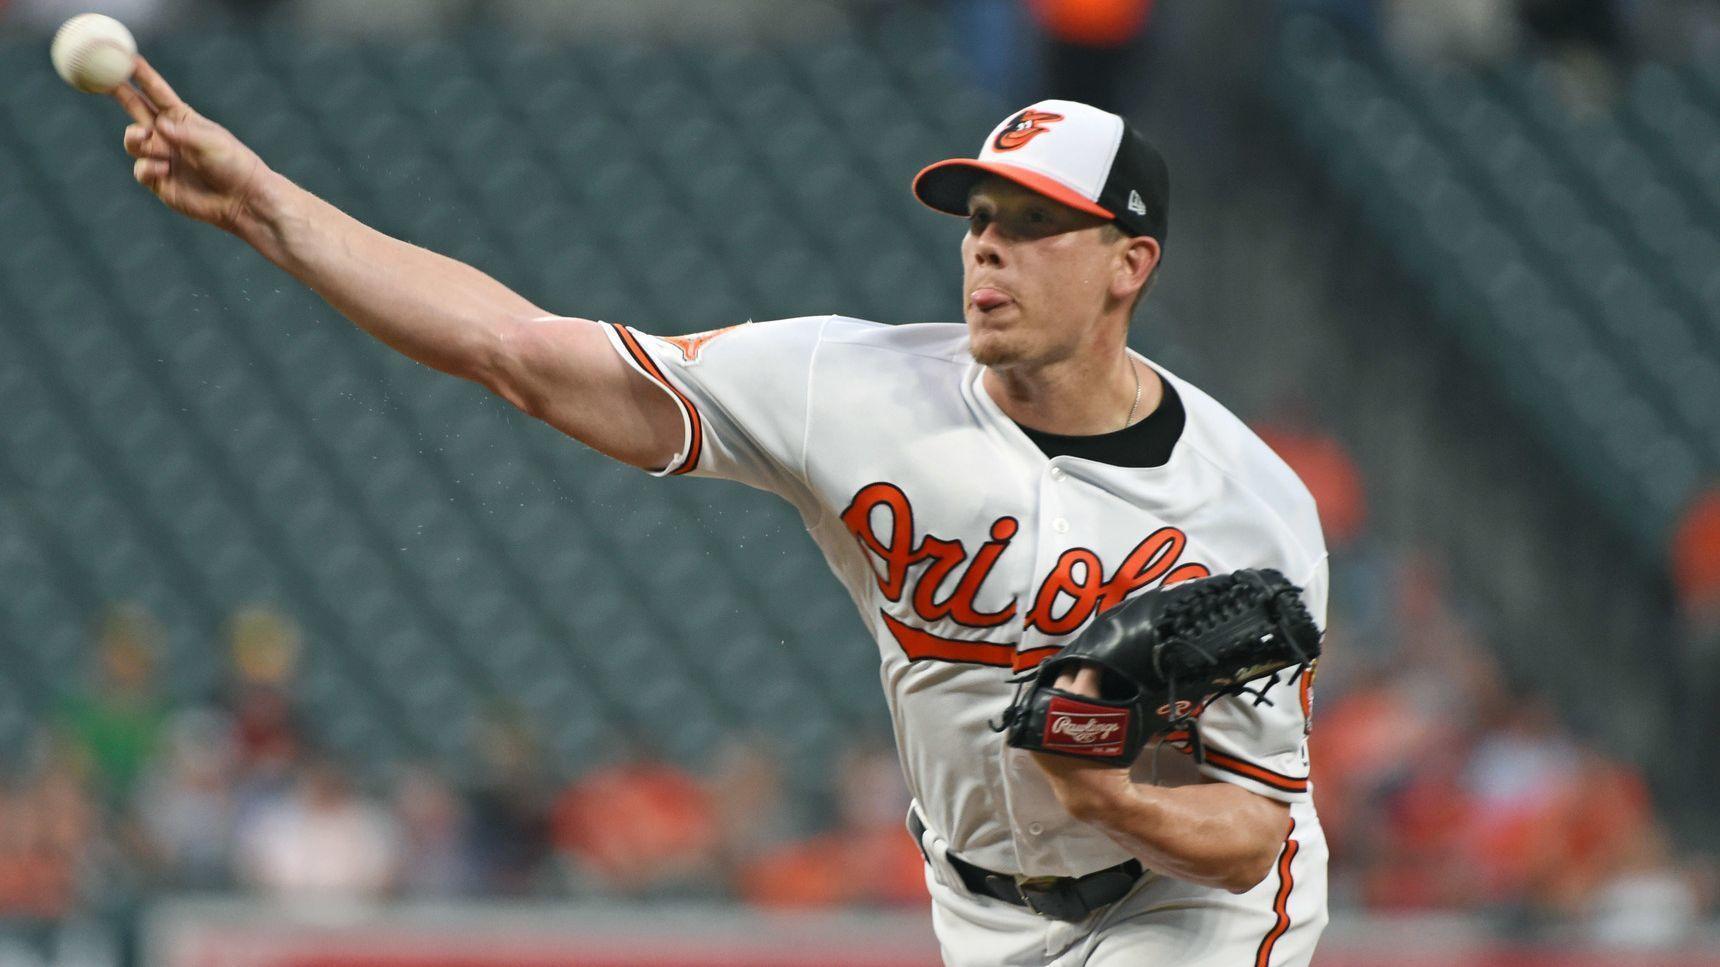 Baseball notes: Nationals release Hellickson, then sign him to minor league contract